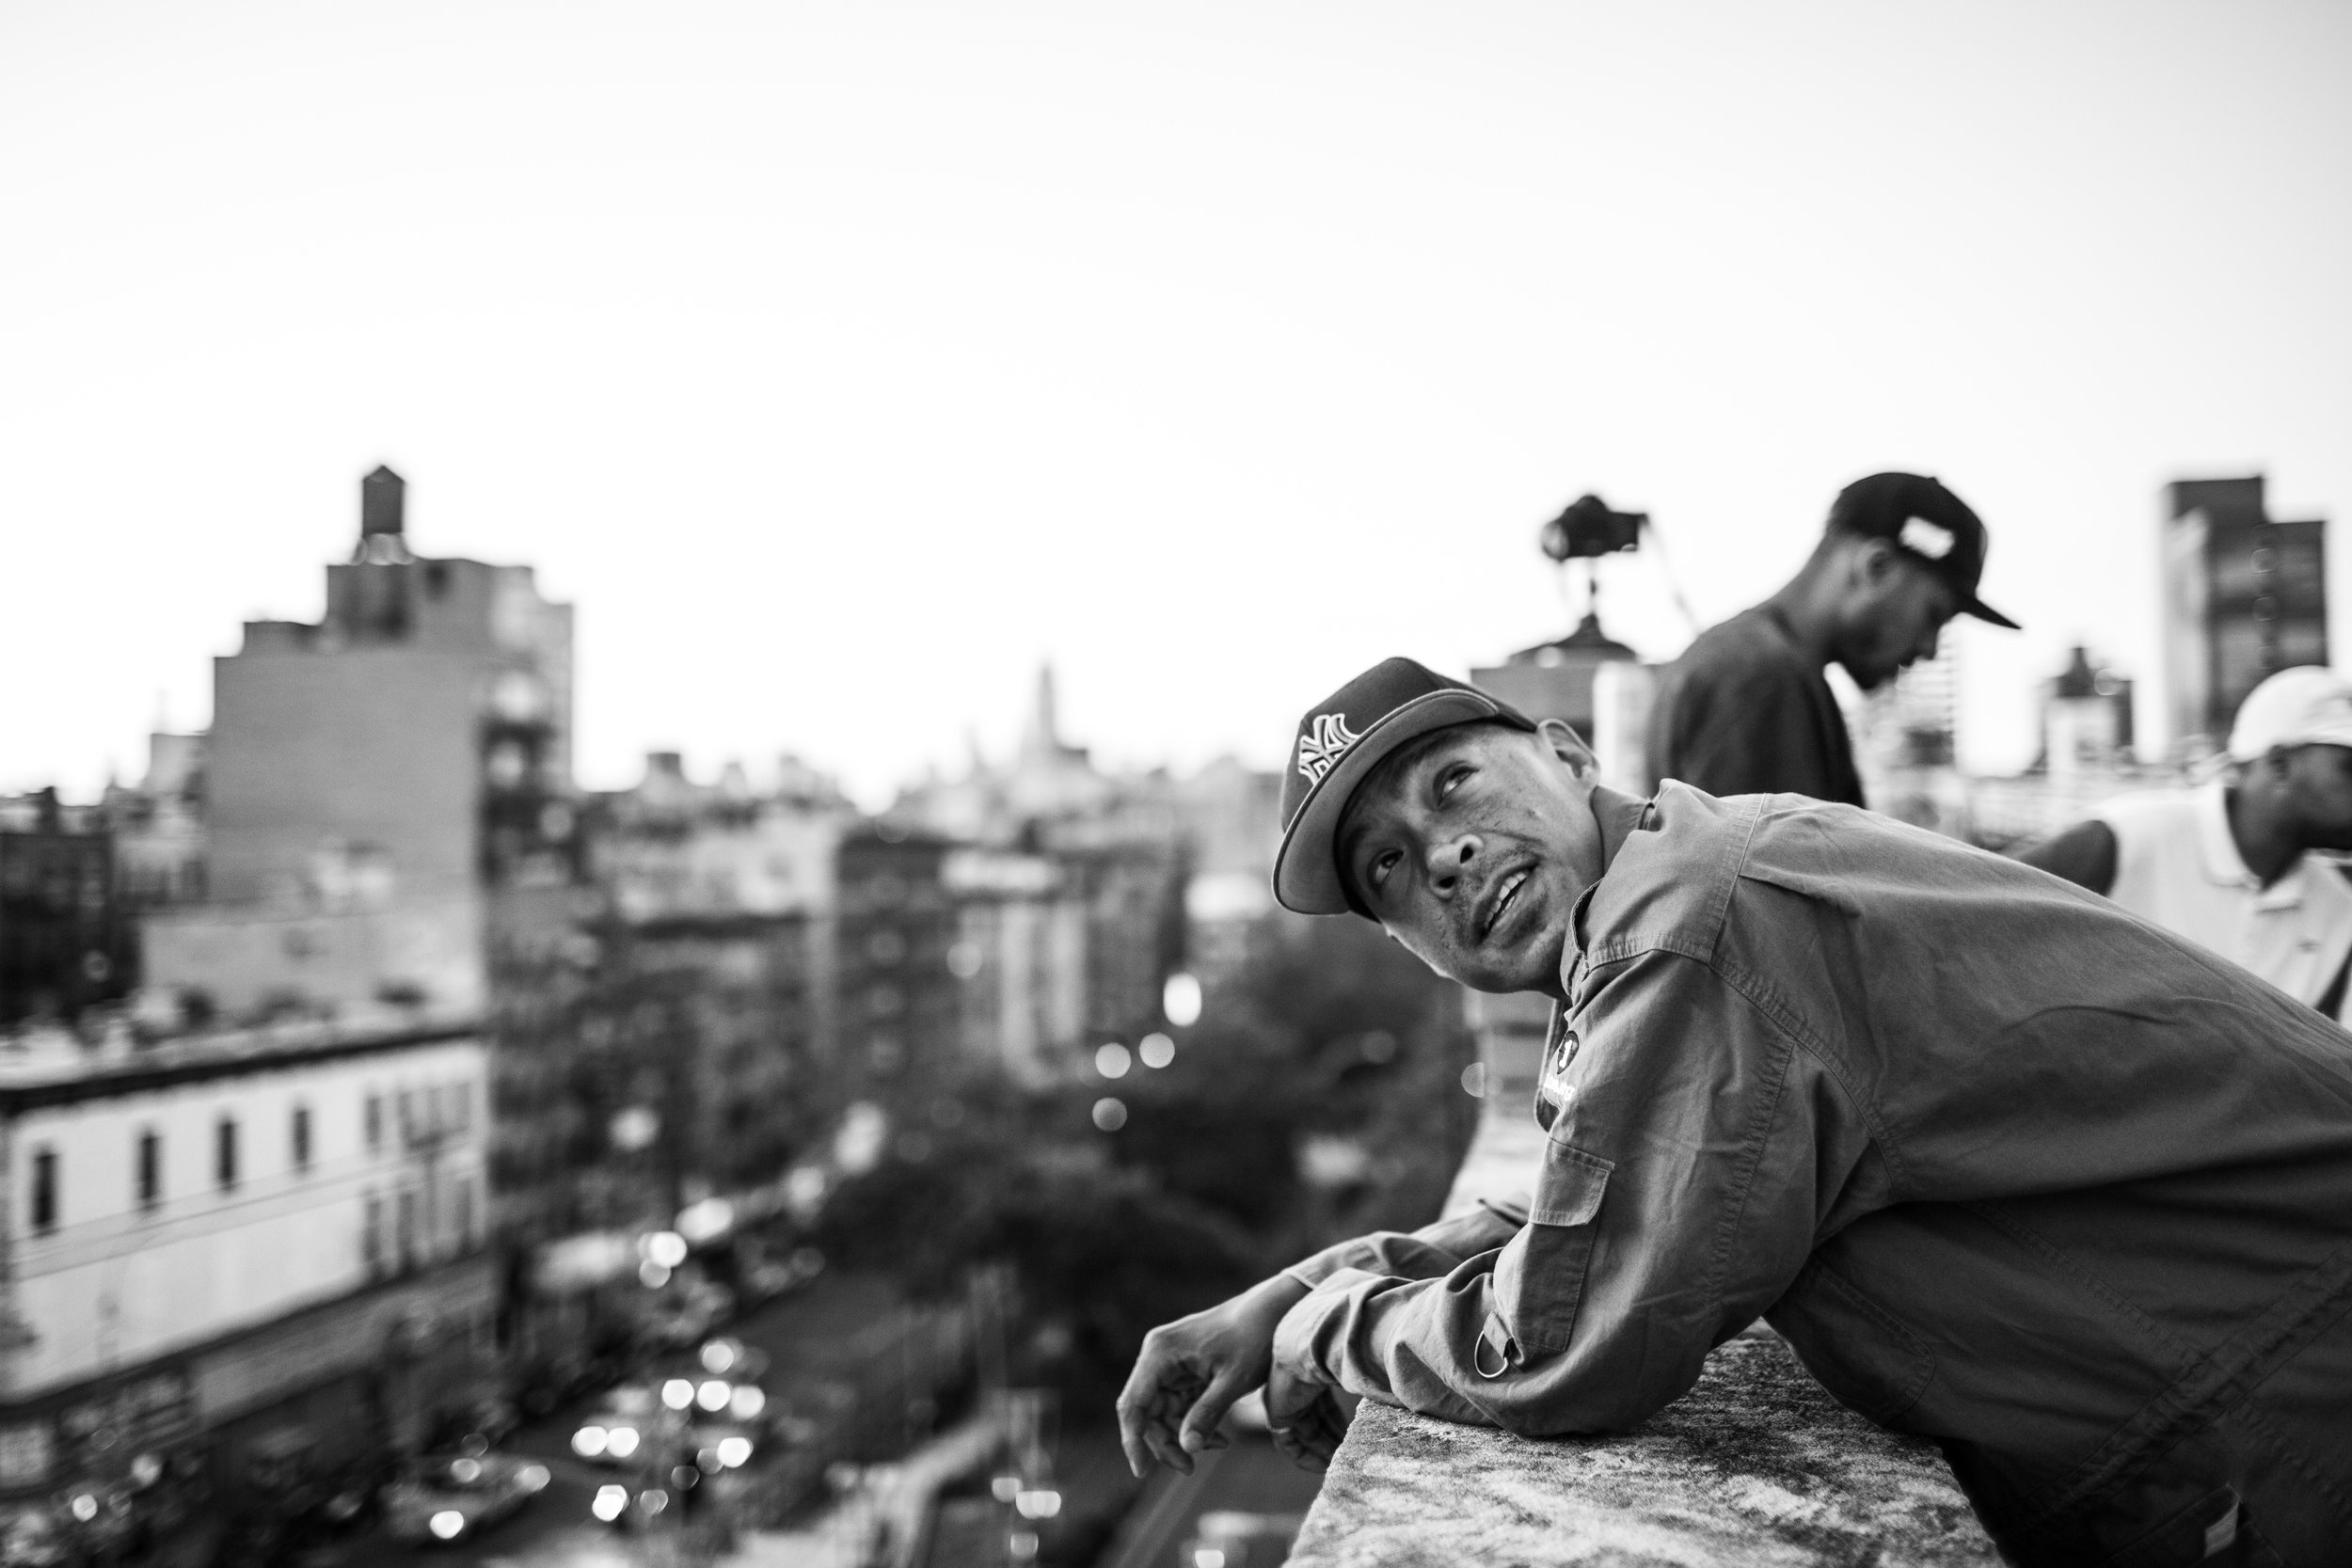  Danny Suppa on a rooftop in NYC 